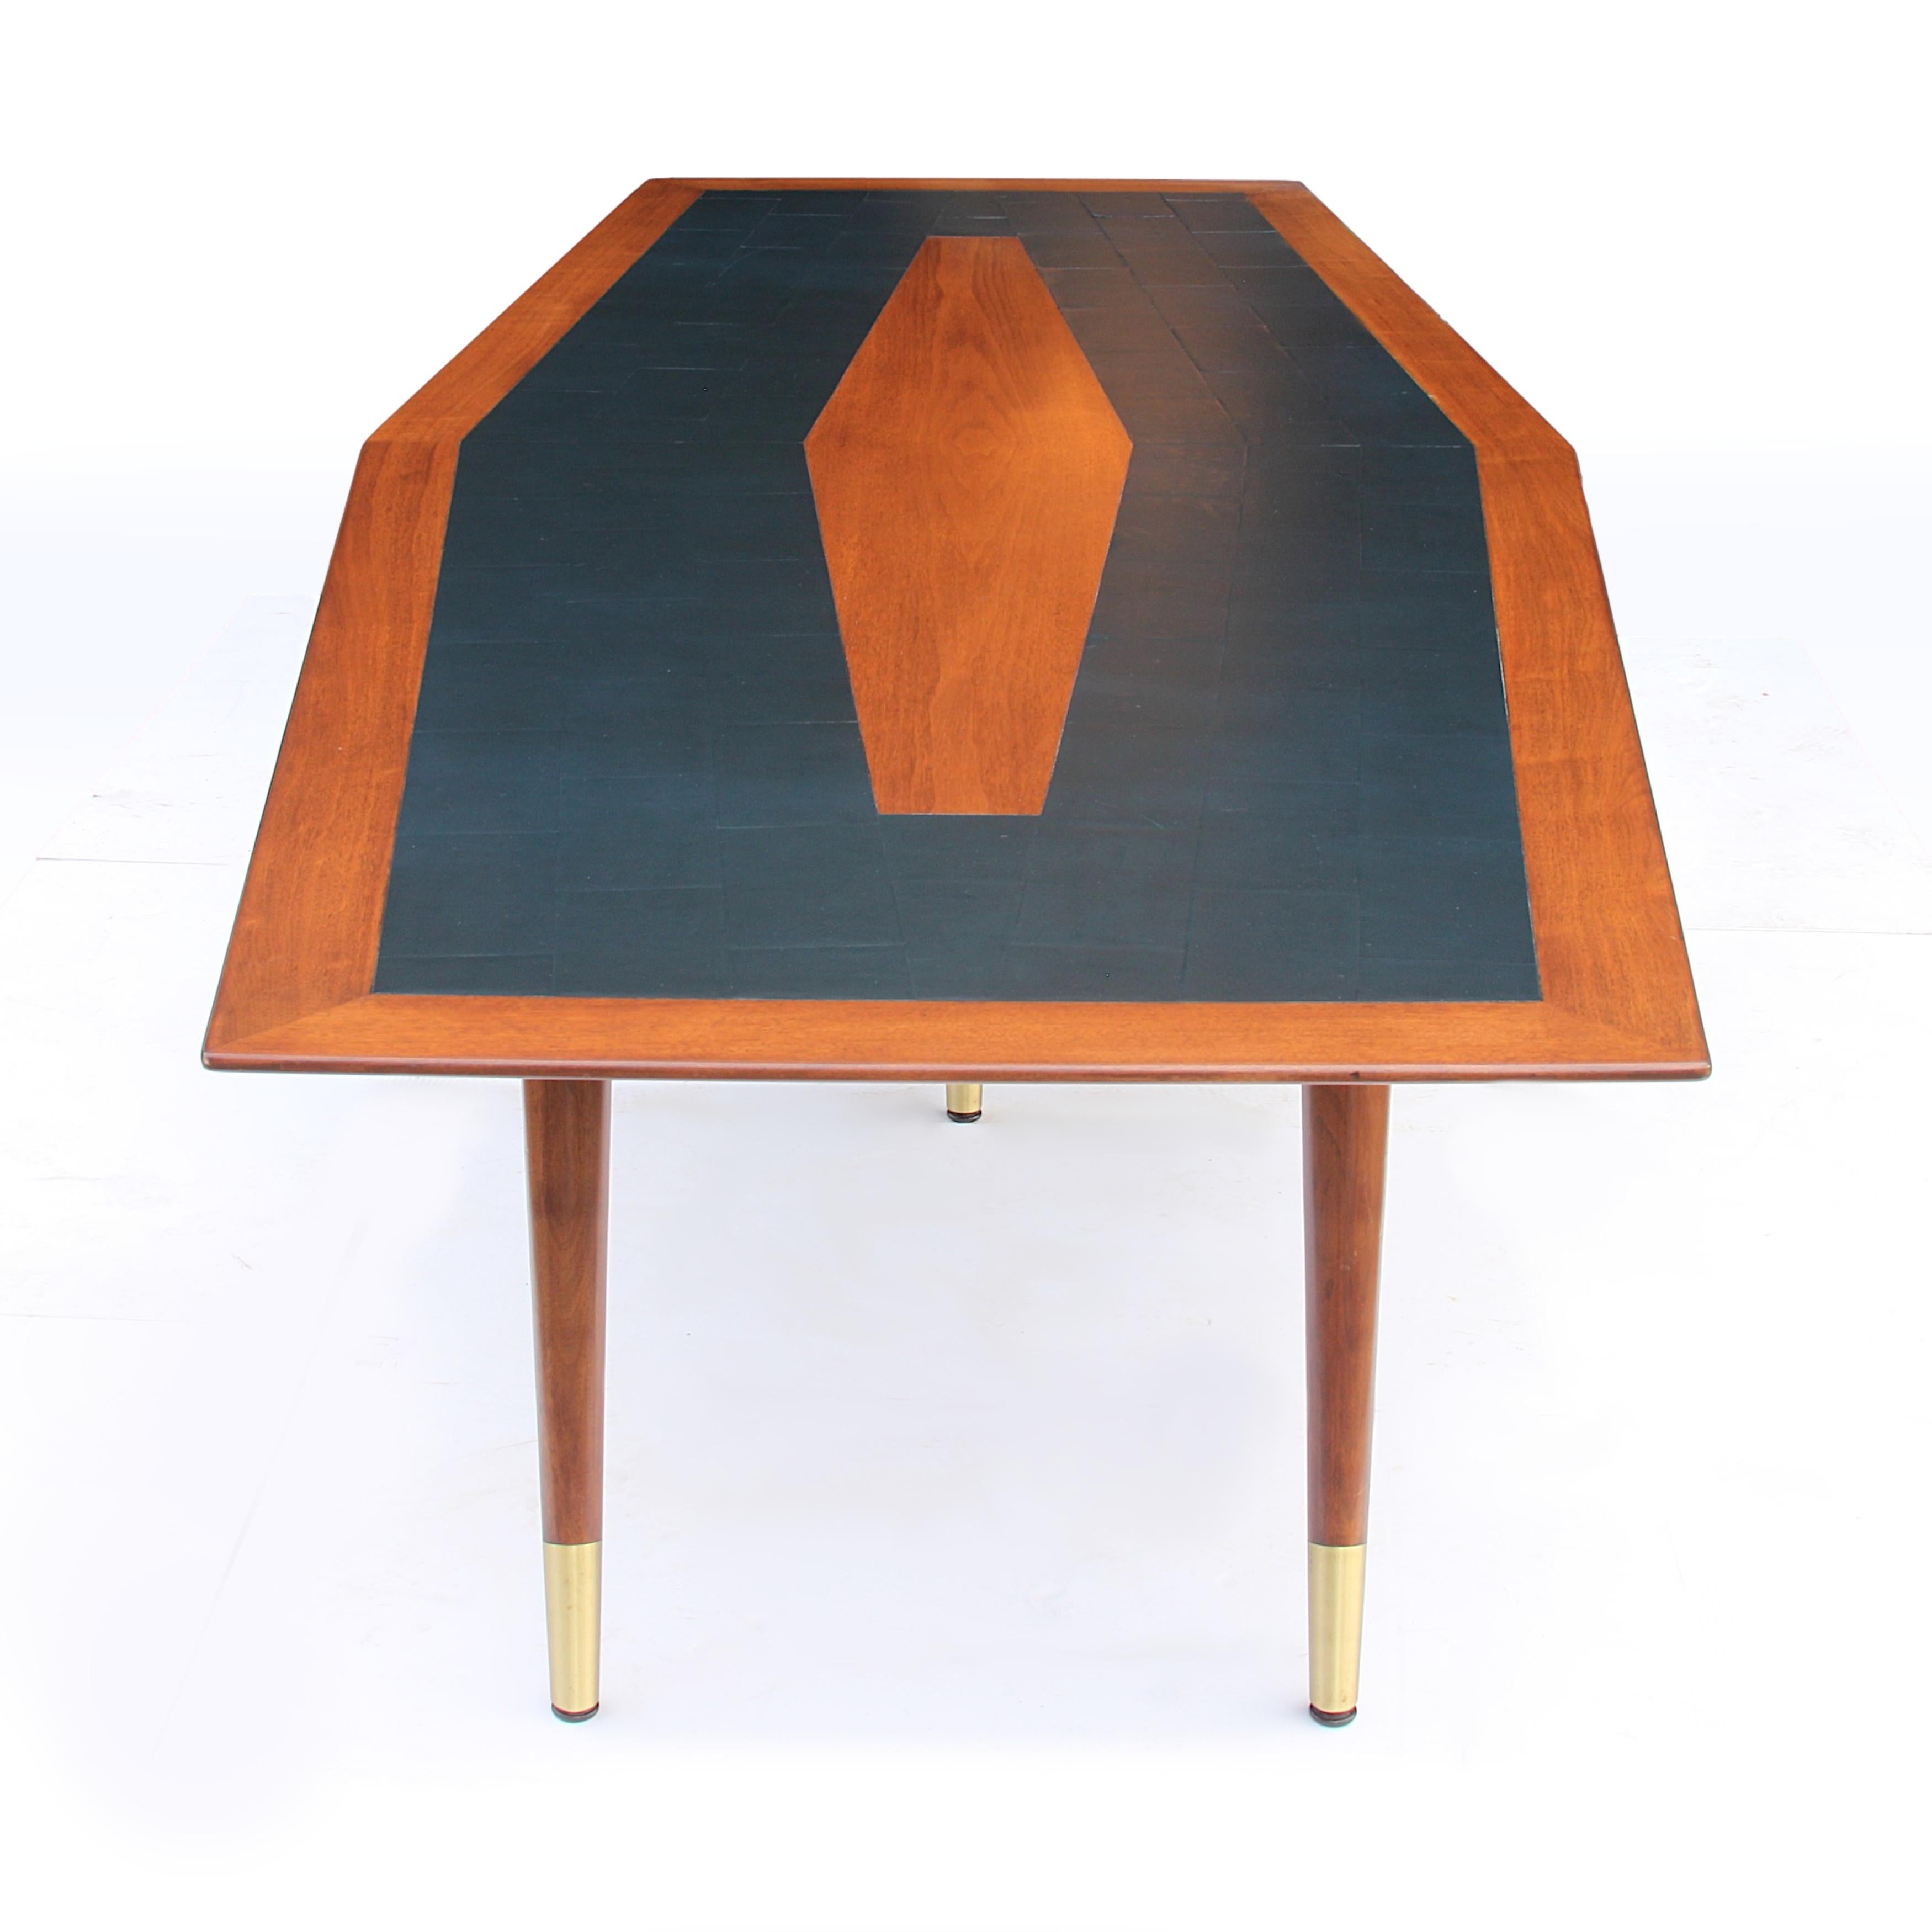 Rare 10ft Walnut Mid-Century Modern Conference Dining Table by Giacomo Buzzitta In Good Condition For Sale In Lafayette, IN